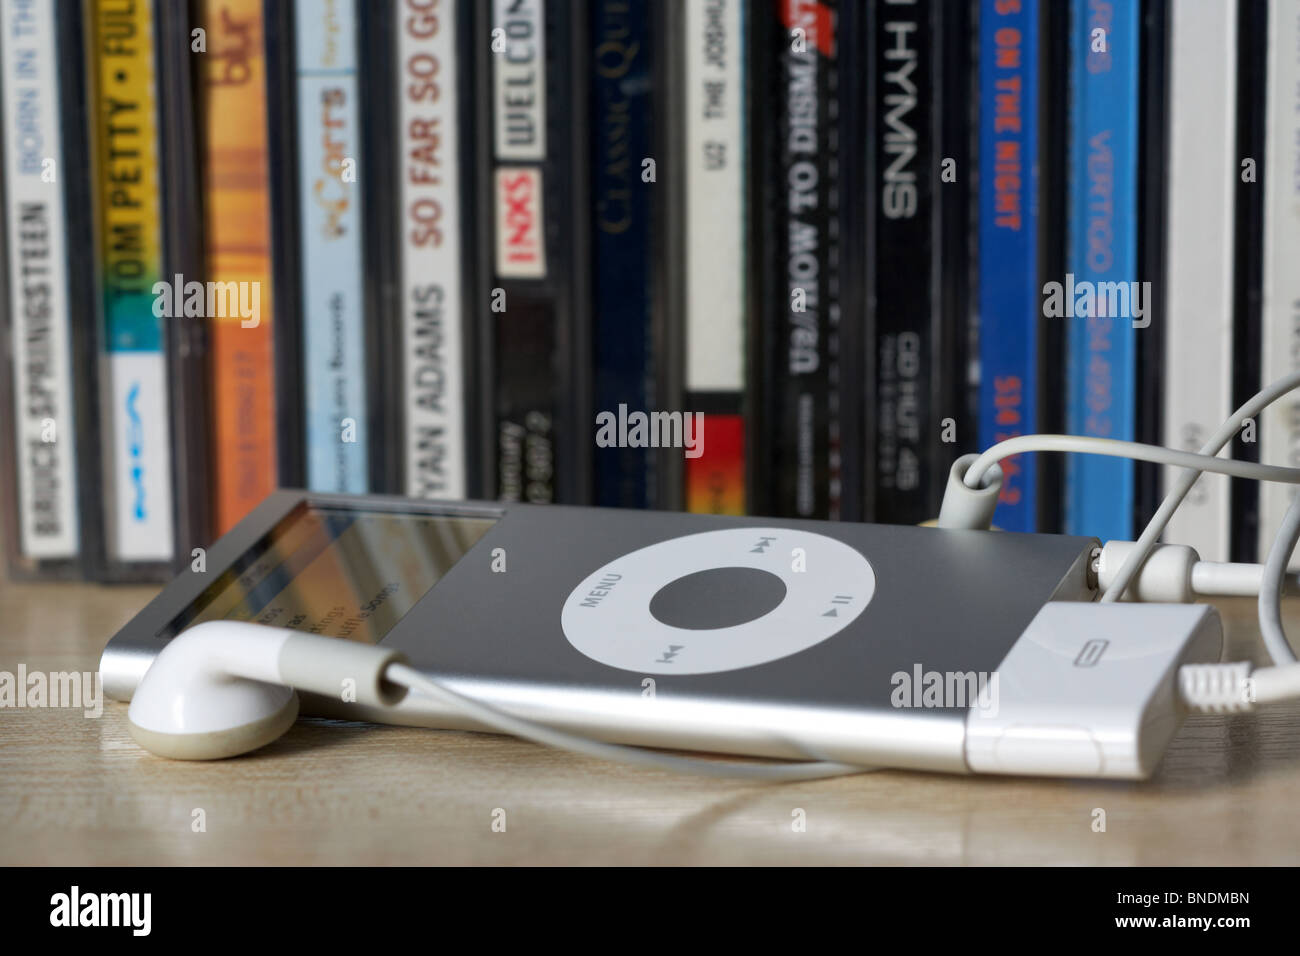 ipod nano in front of a row of old cd album cases in the uk Stock Photo